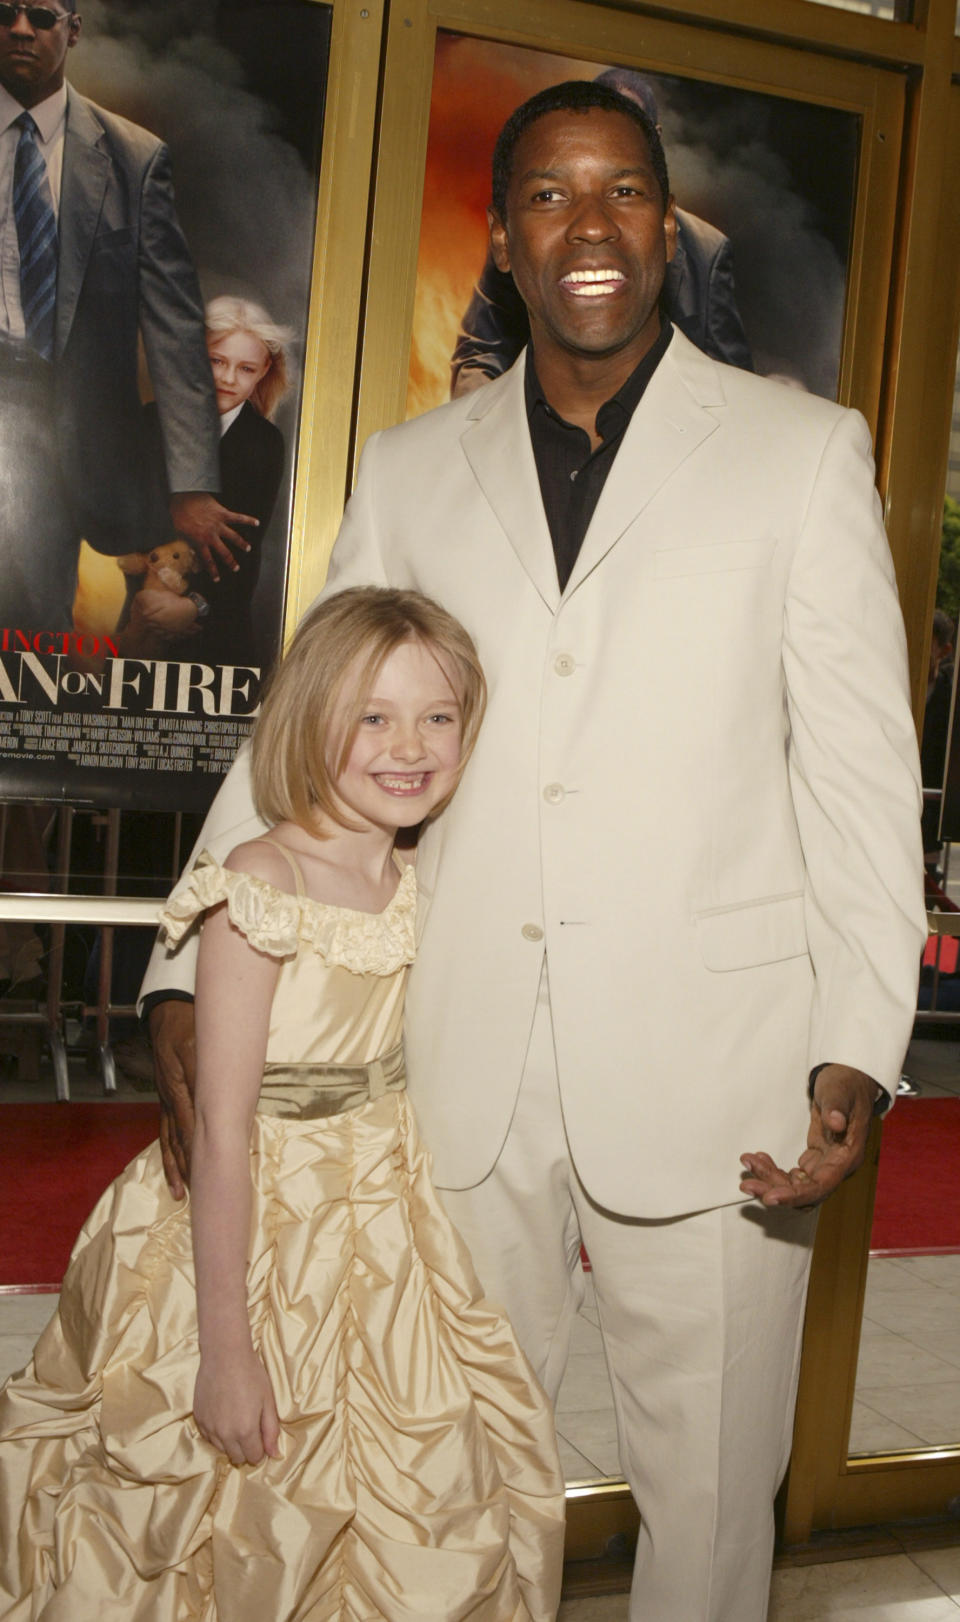 Dakota Fanning and Denzel Washington at the Man on Fire premiere in 2004. 